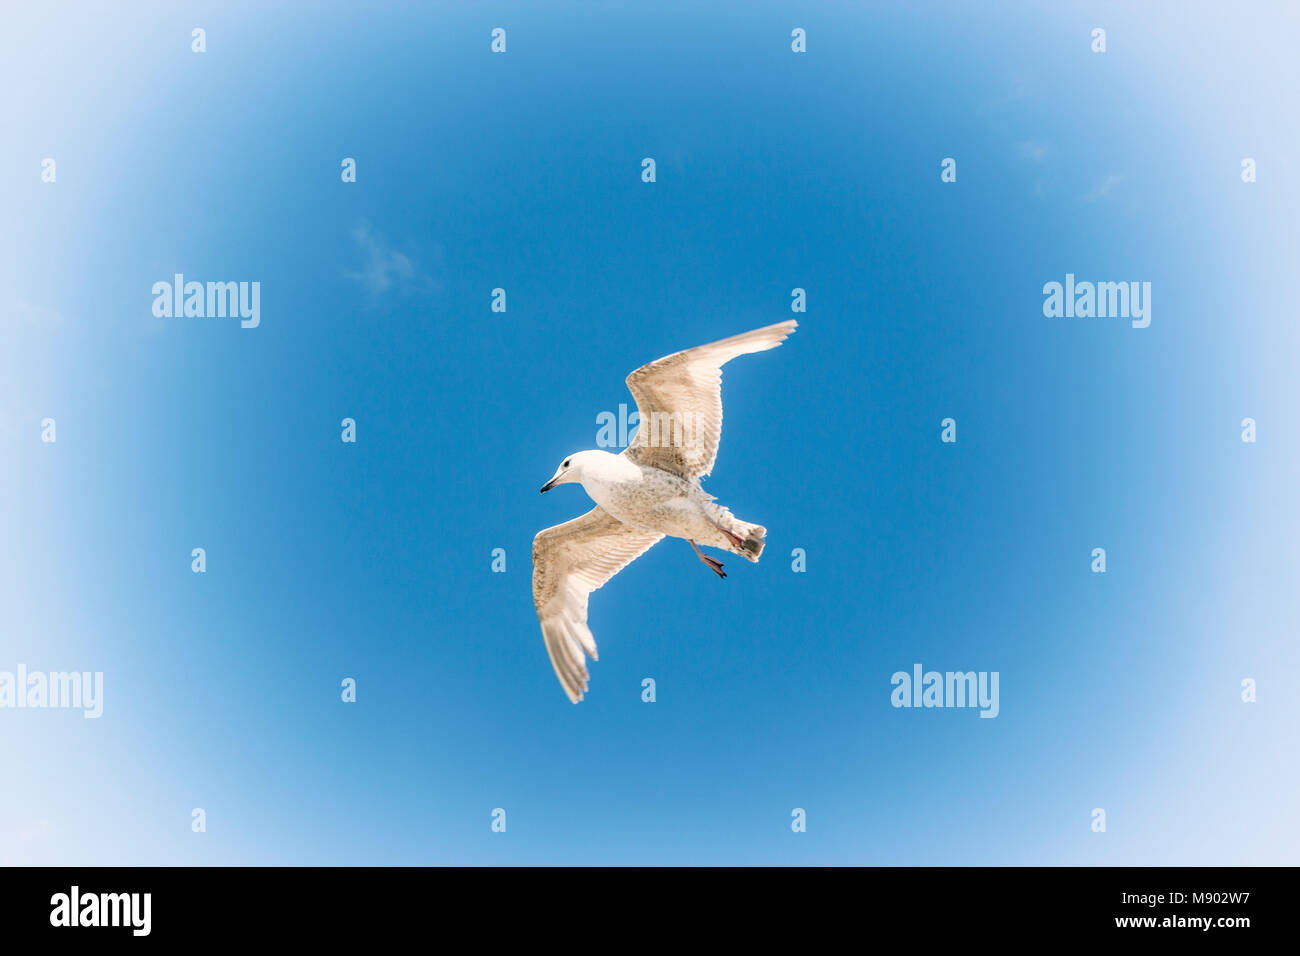 Lone seagull in flight against blue sky. Stock Photo